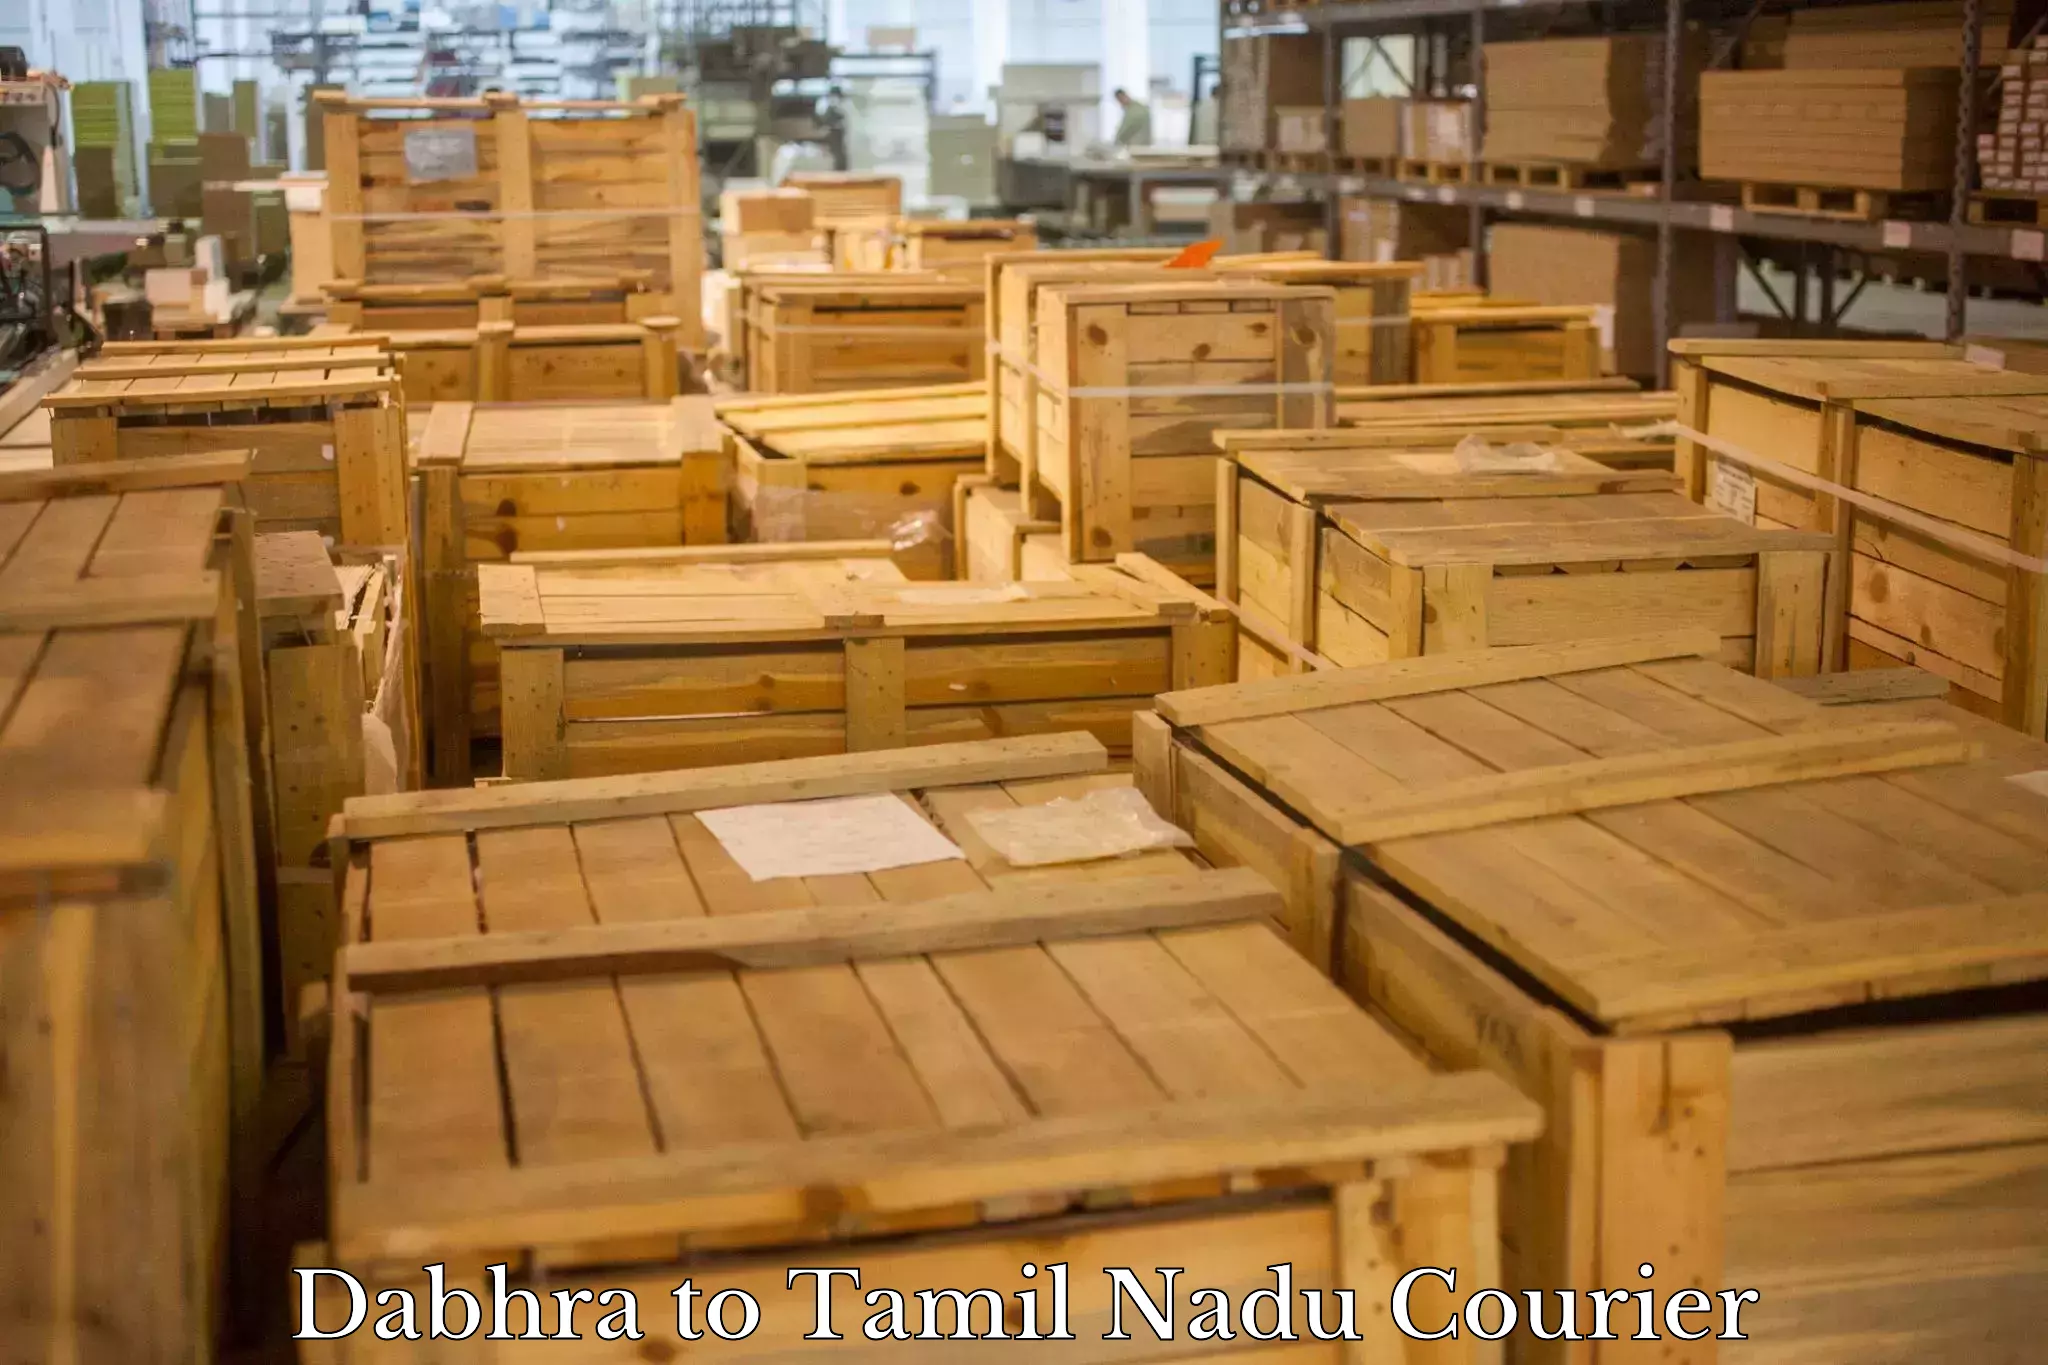 Multi-national courier services Dabhra to Tamil Nadu